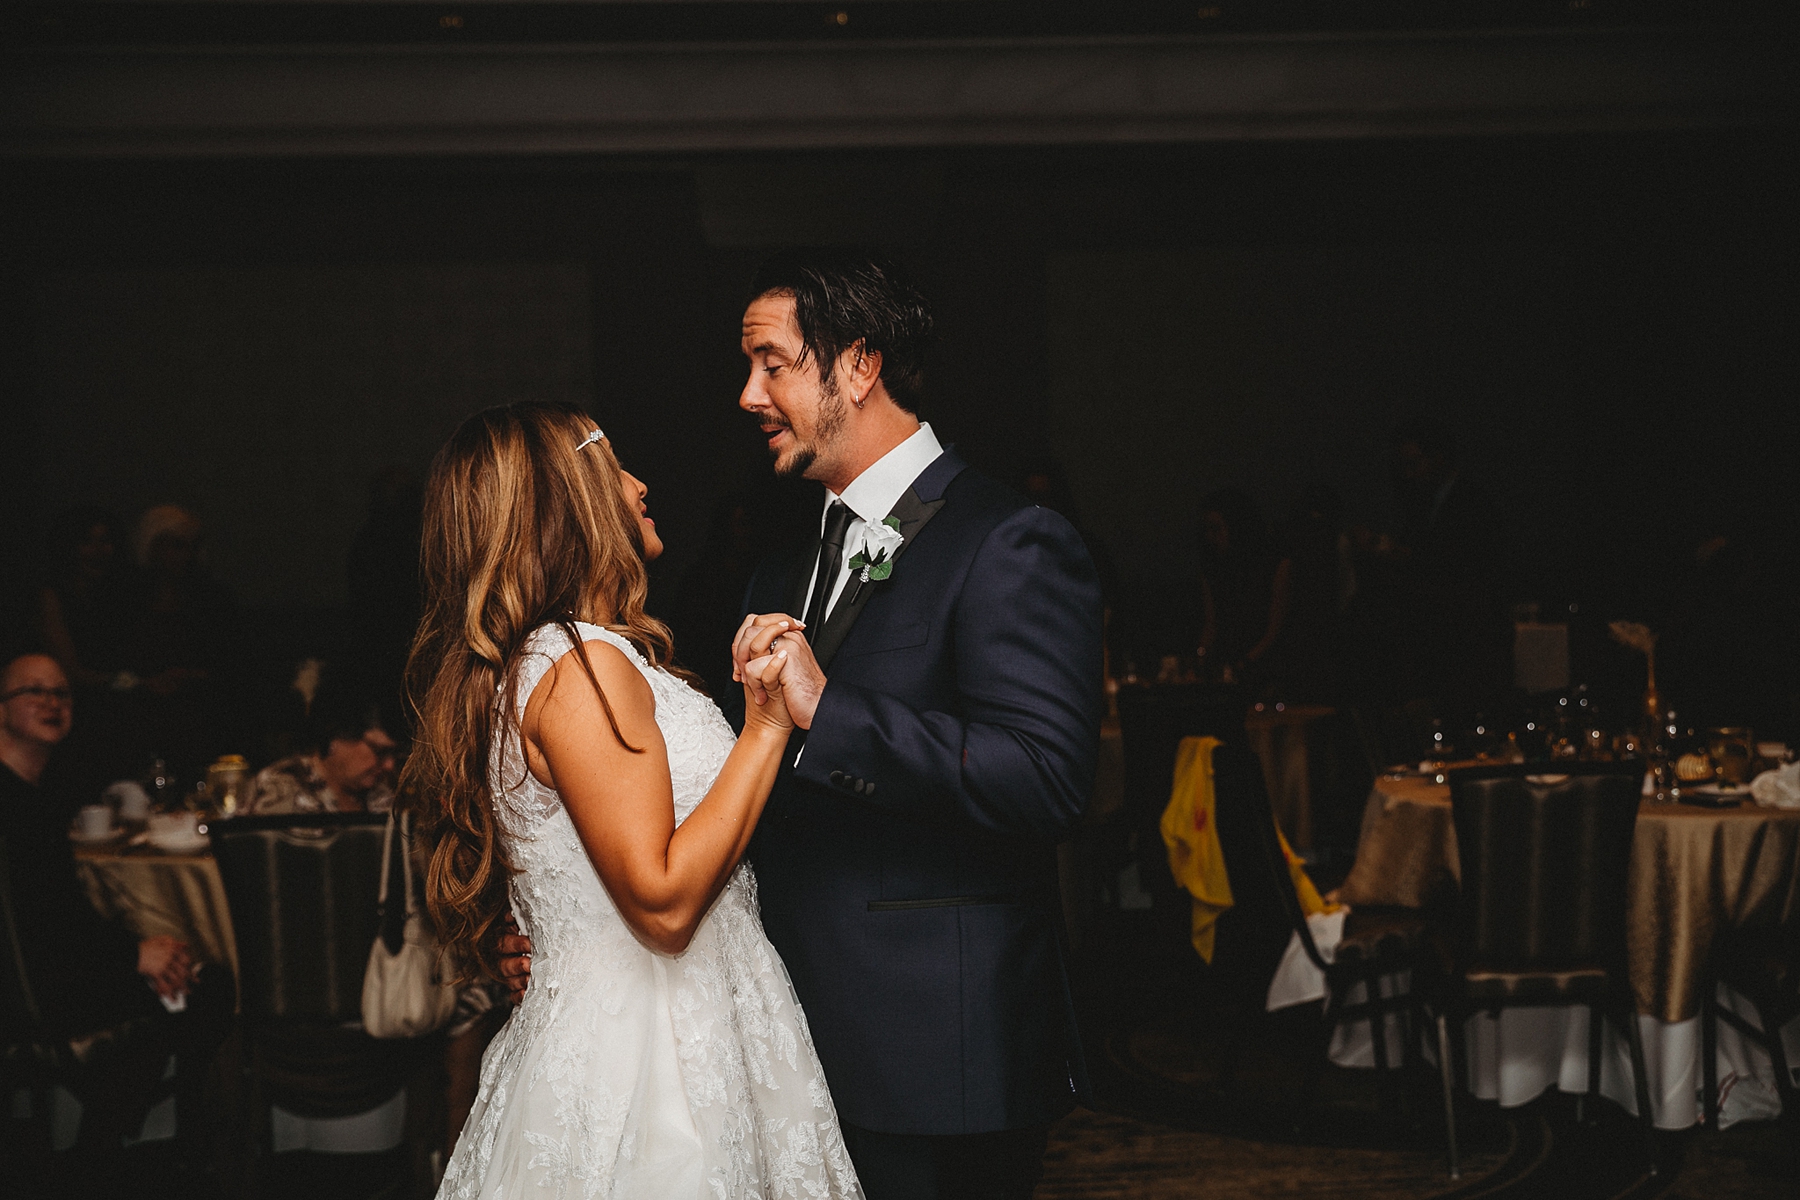 husband and wife share first dance at wedding reception